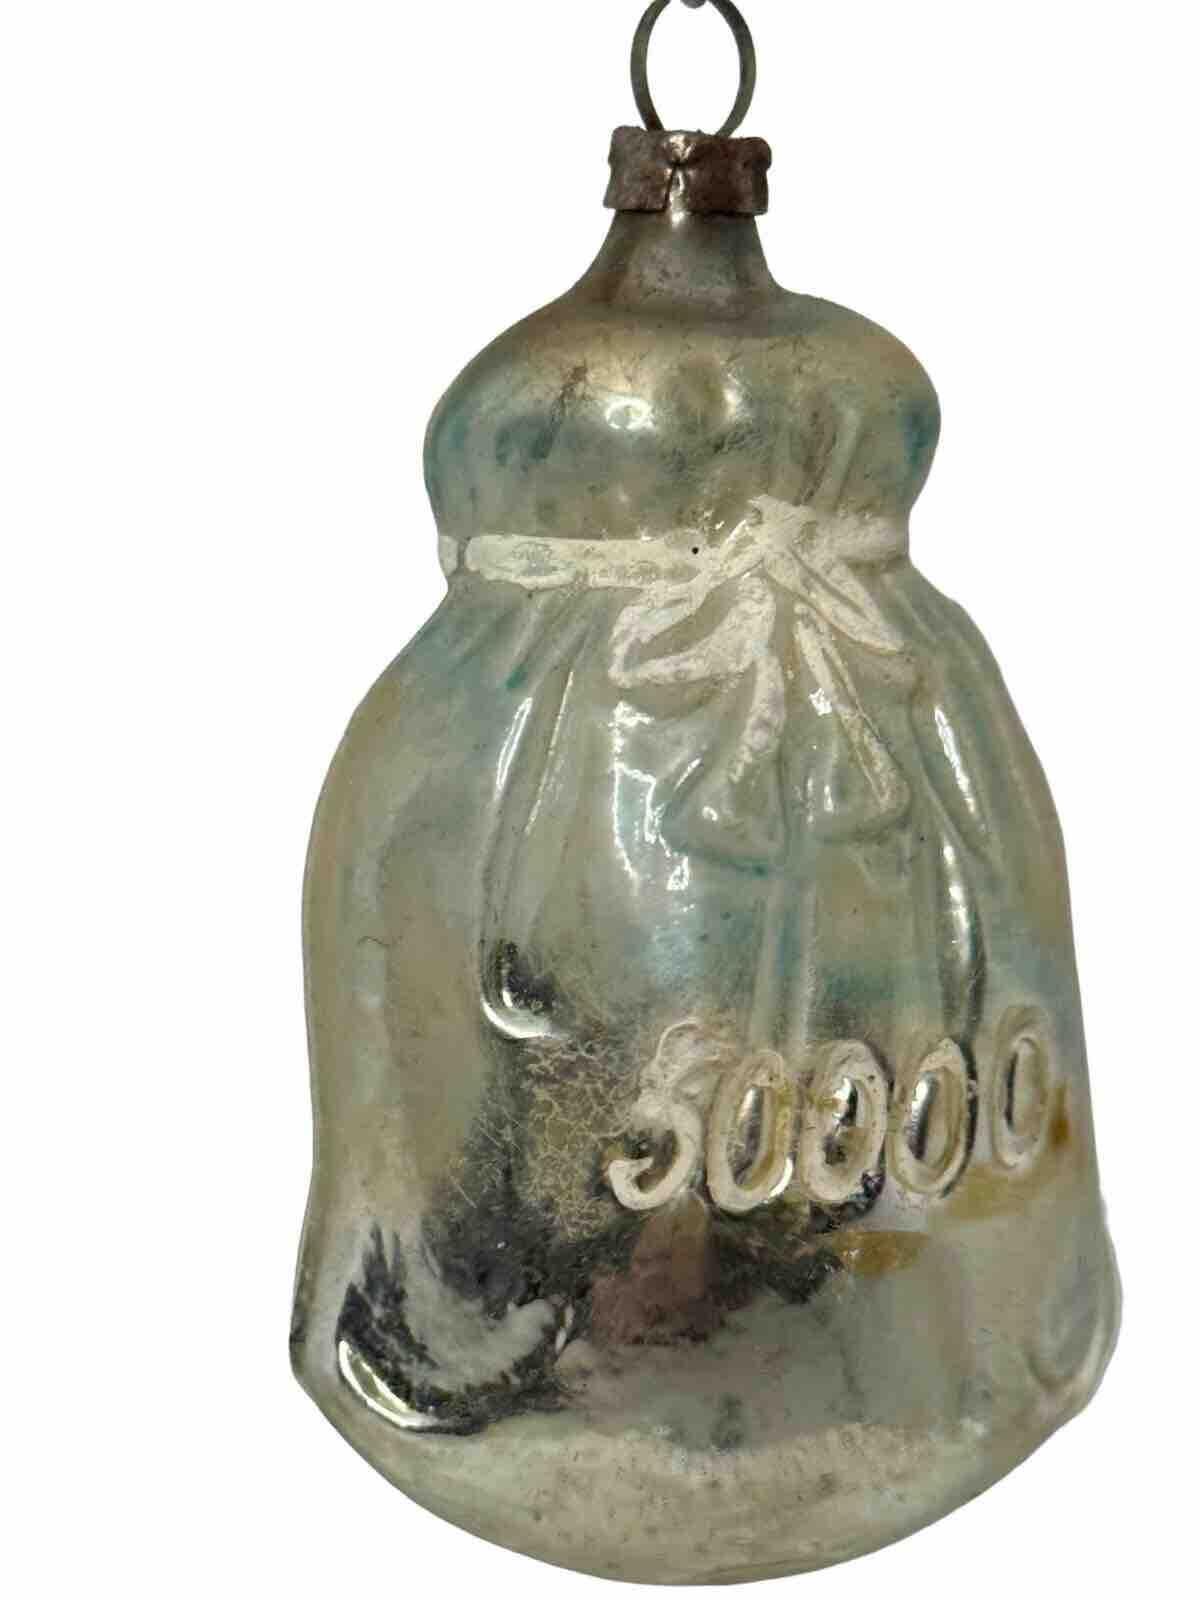 Add a touch of vintage charm to your Christmas tree with this antique German glass ornament. The unique design features a money bag, perfect for those who love to incorporate monetary elements into their holiday decor. The delicate mercury glass